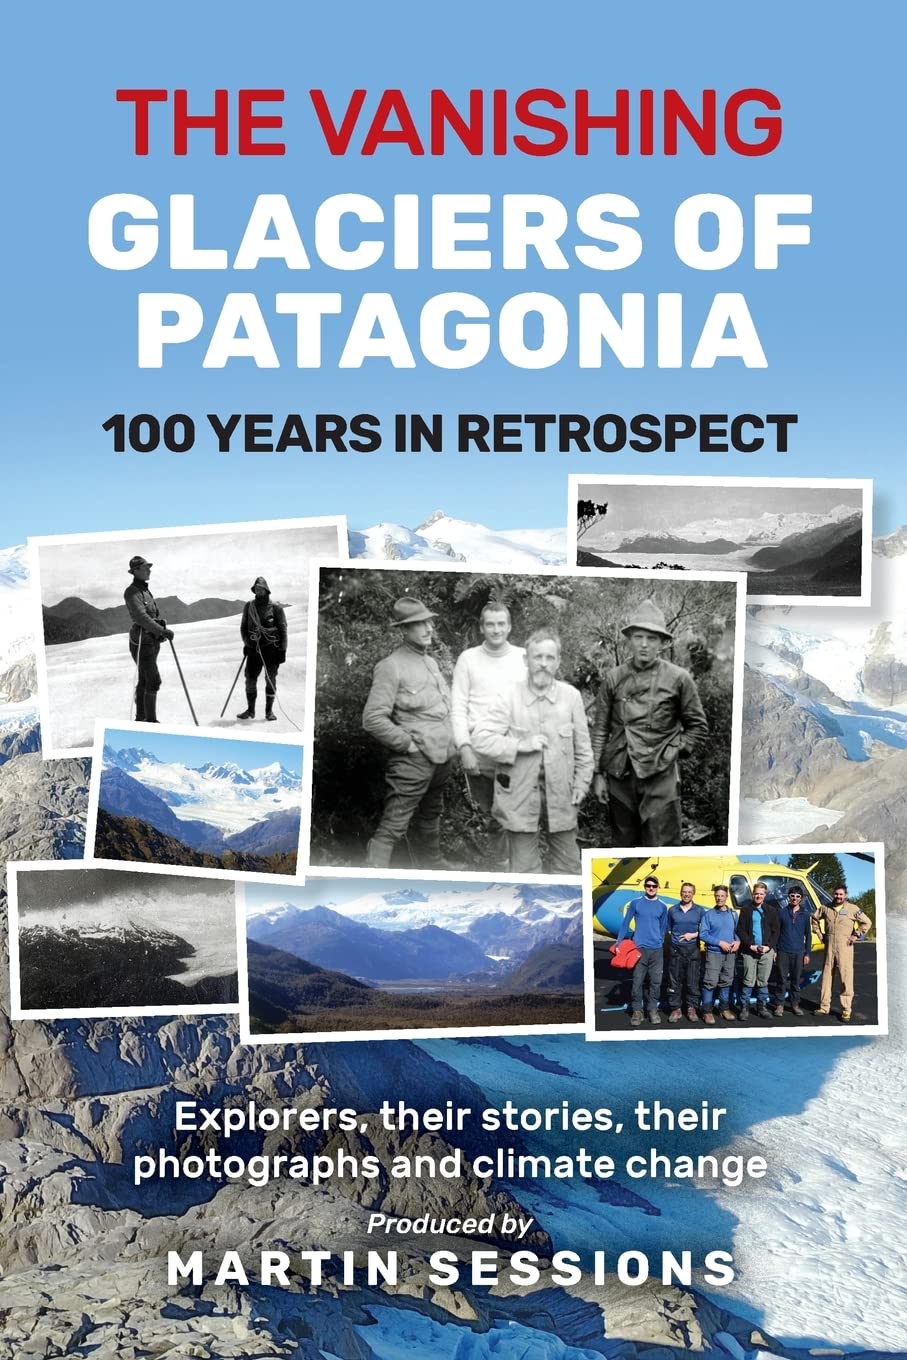 Martin Sessions: The Vanishing Glaciers of Patagonia (Paperback, 2020, Inspiring Publisher)